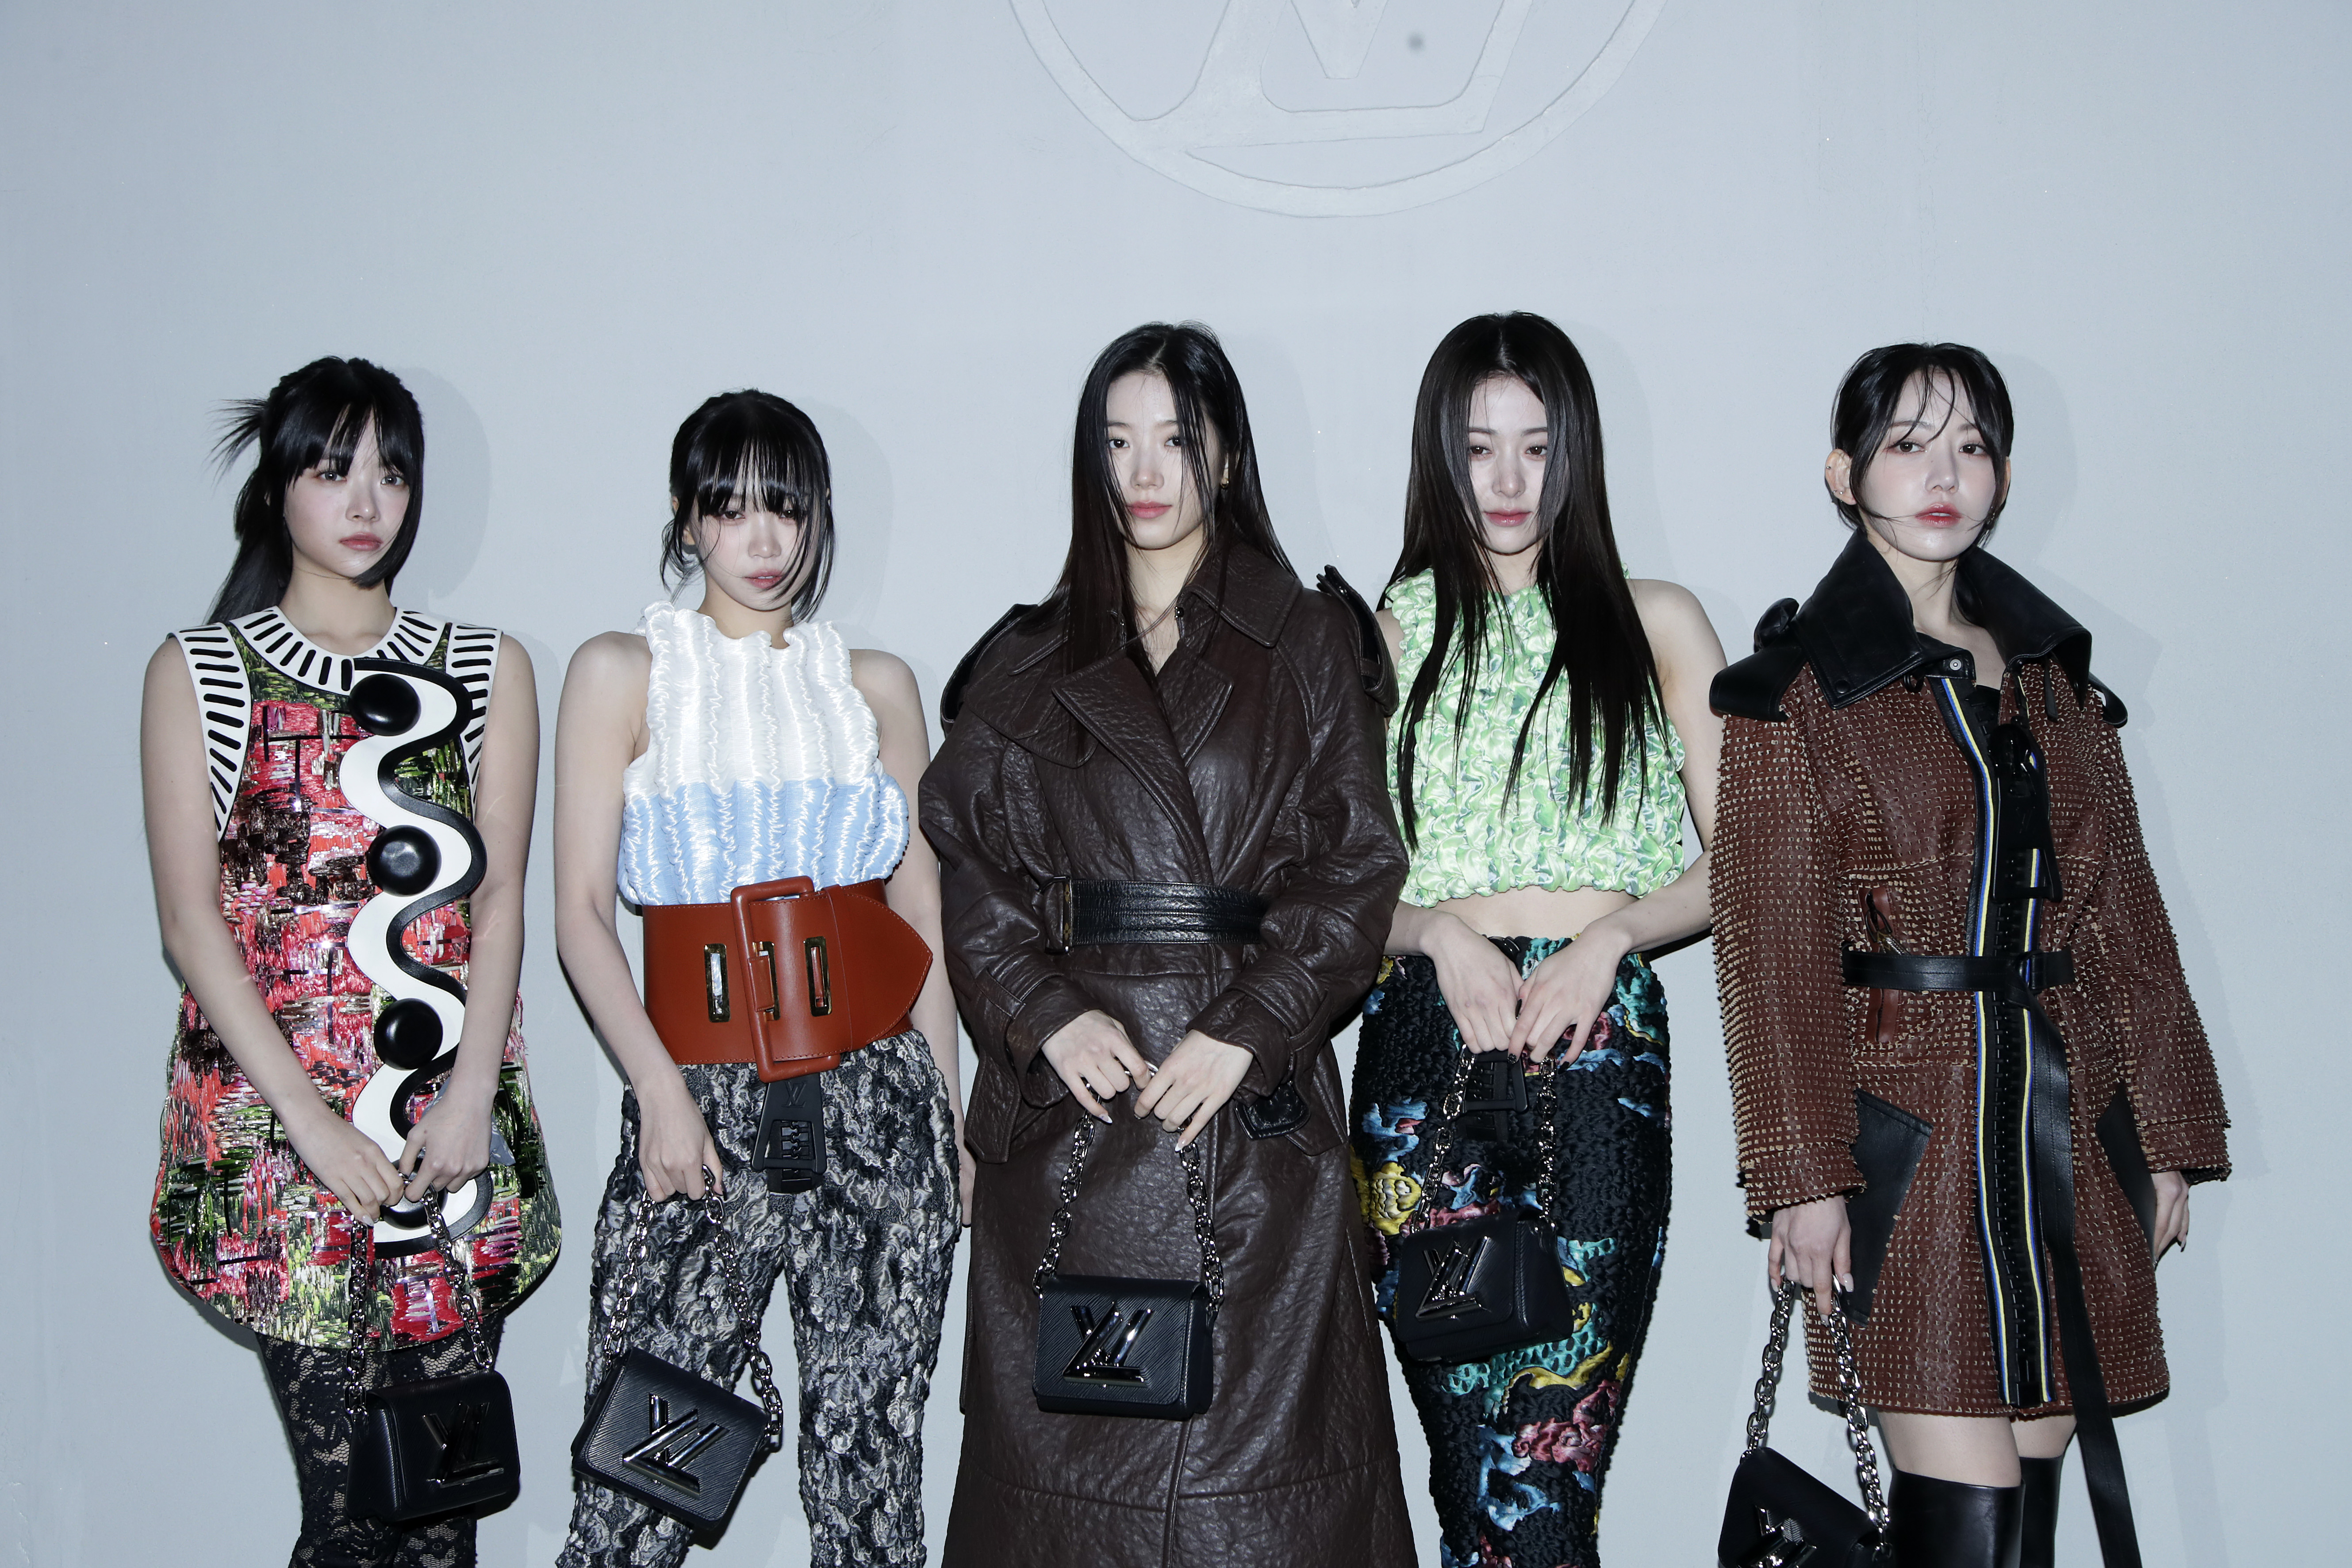 Louis Vuitton show in Seoul - in pictures